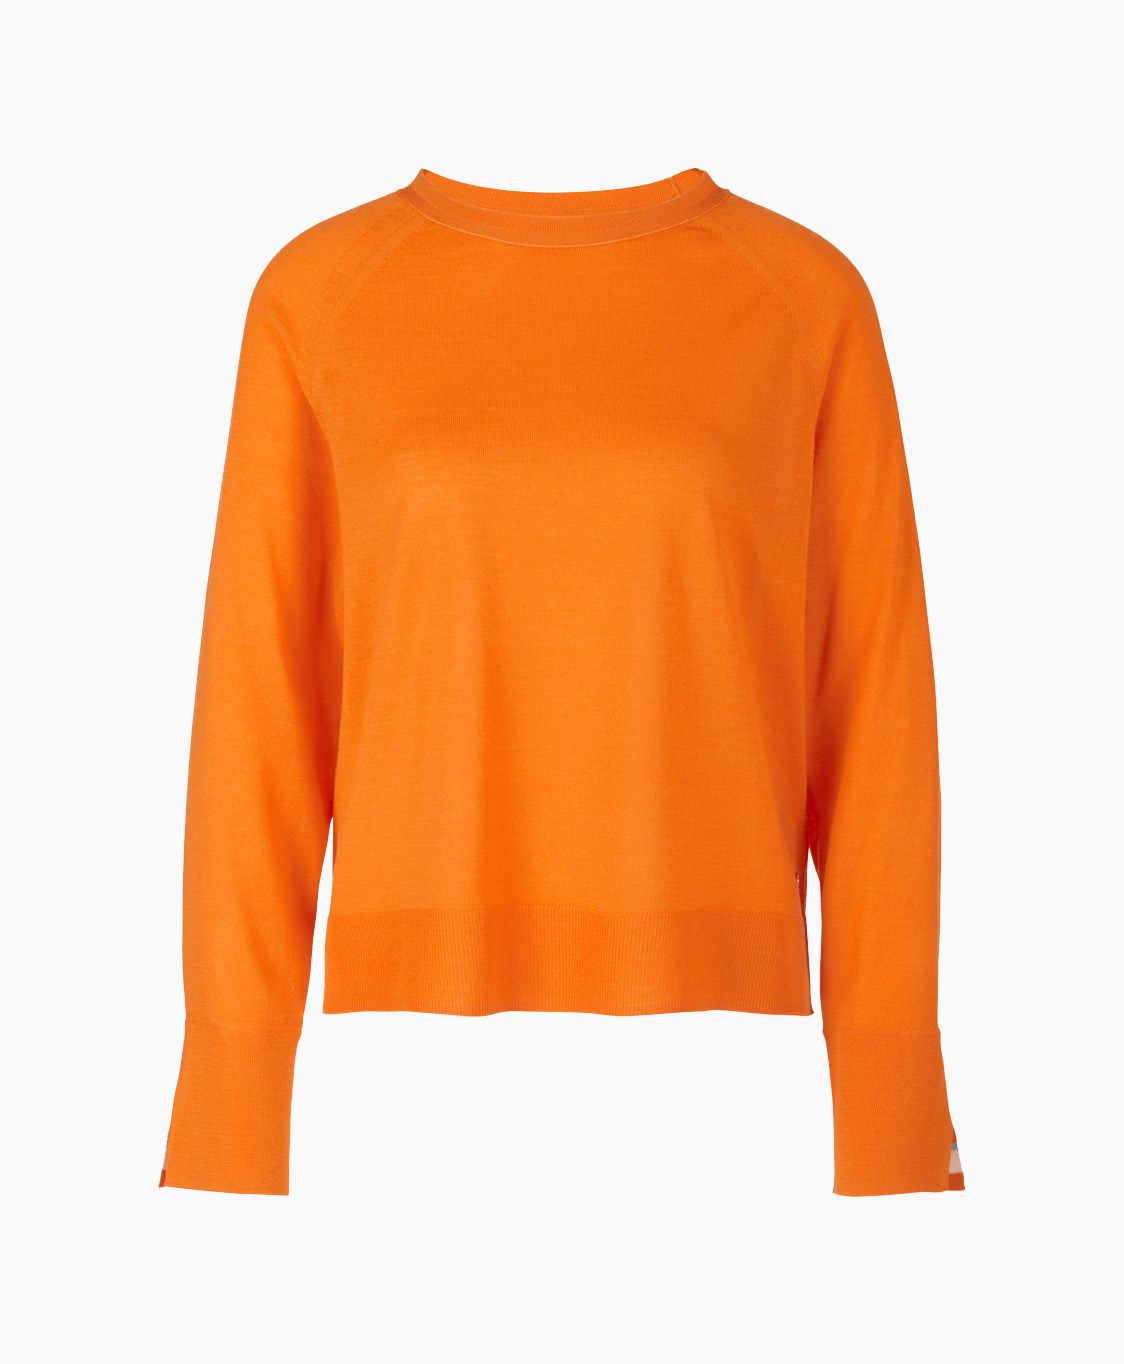 Marccain Collectie Pullover Uc 41.03 M73 Peach